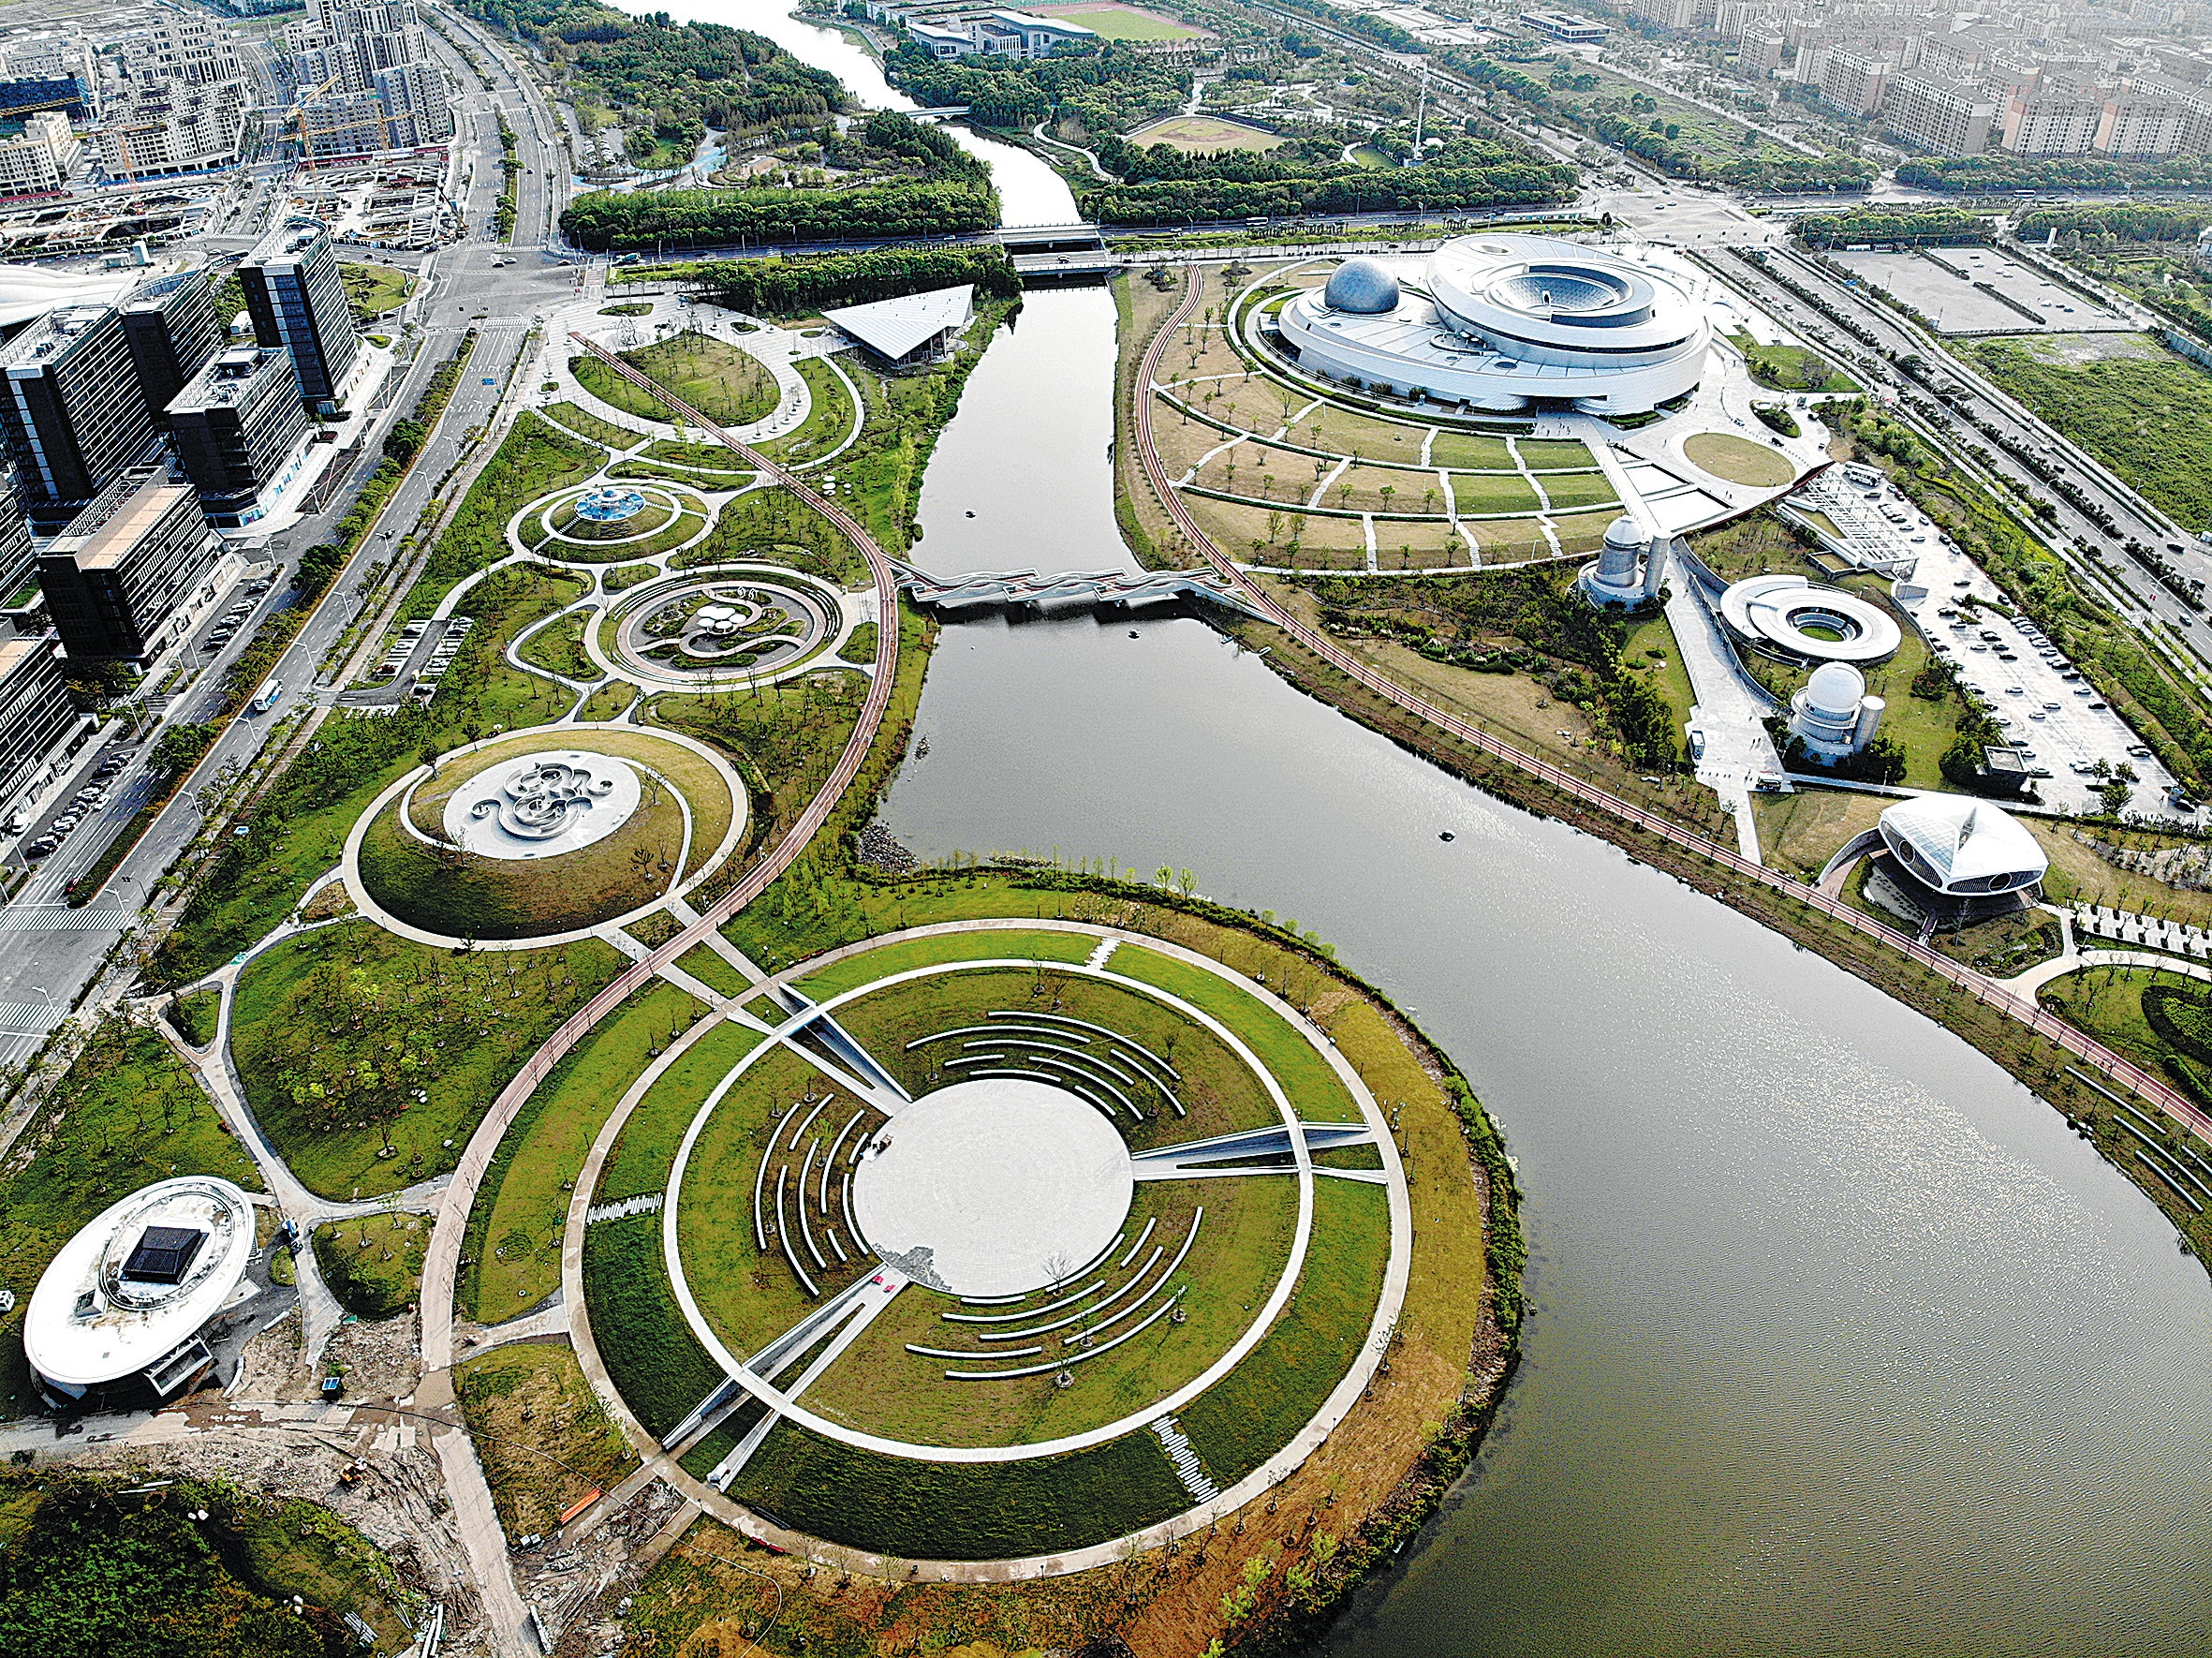 The sponge park is designed to resemble planets, around which are paths